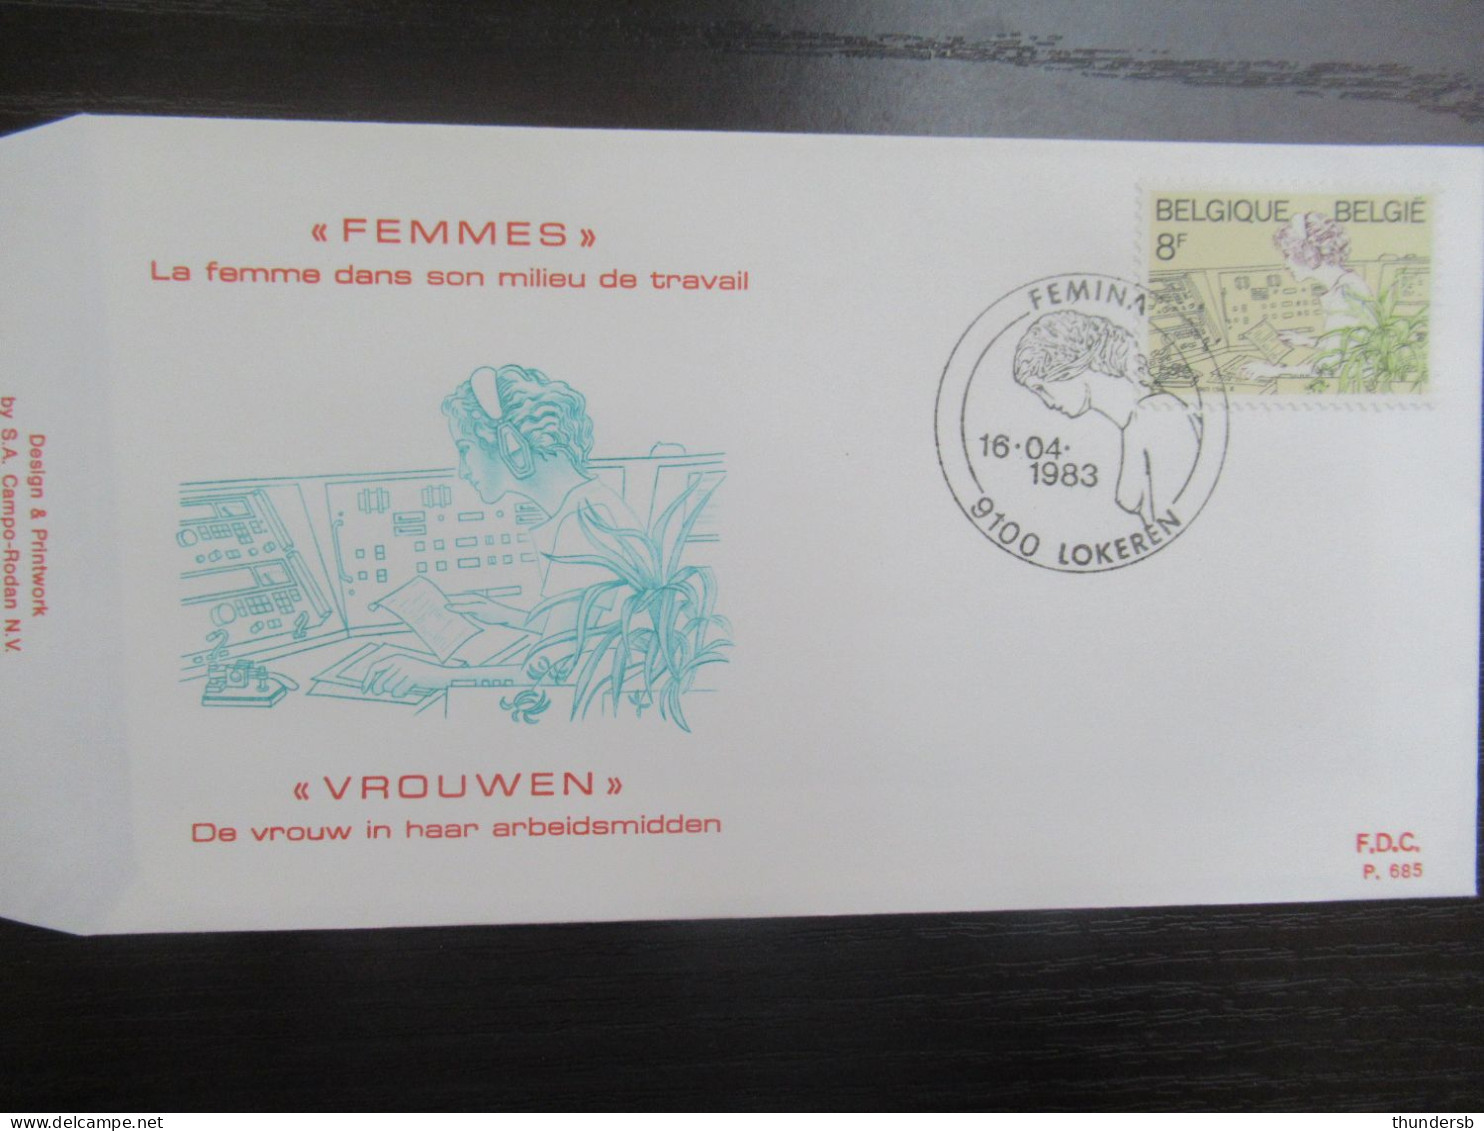 FDC 2086/88 'Vrouwen' - 1981-1990